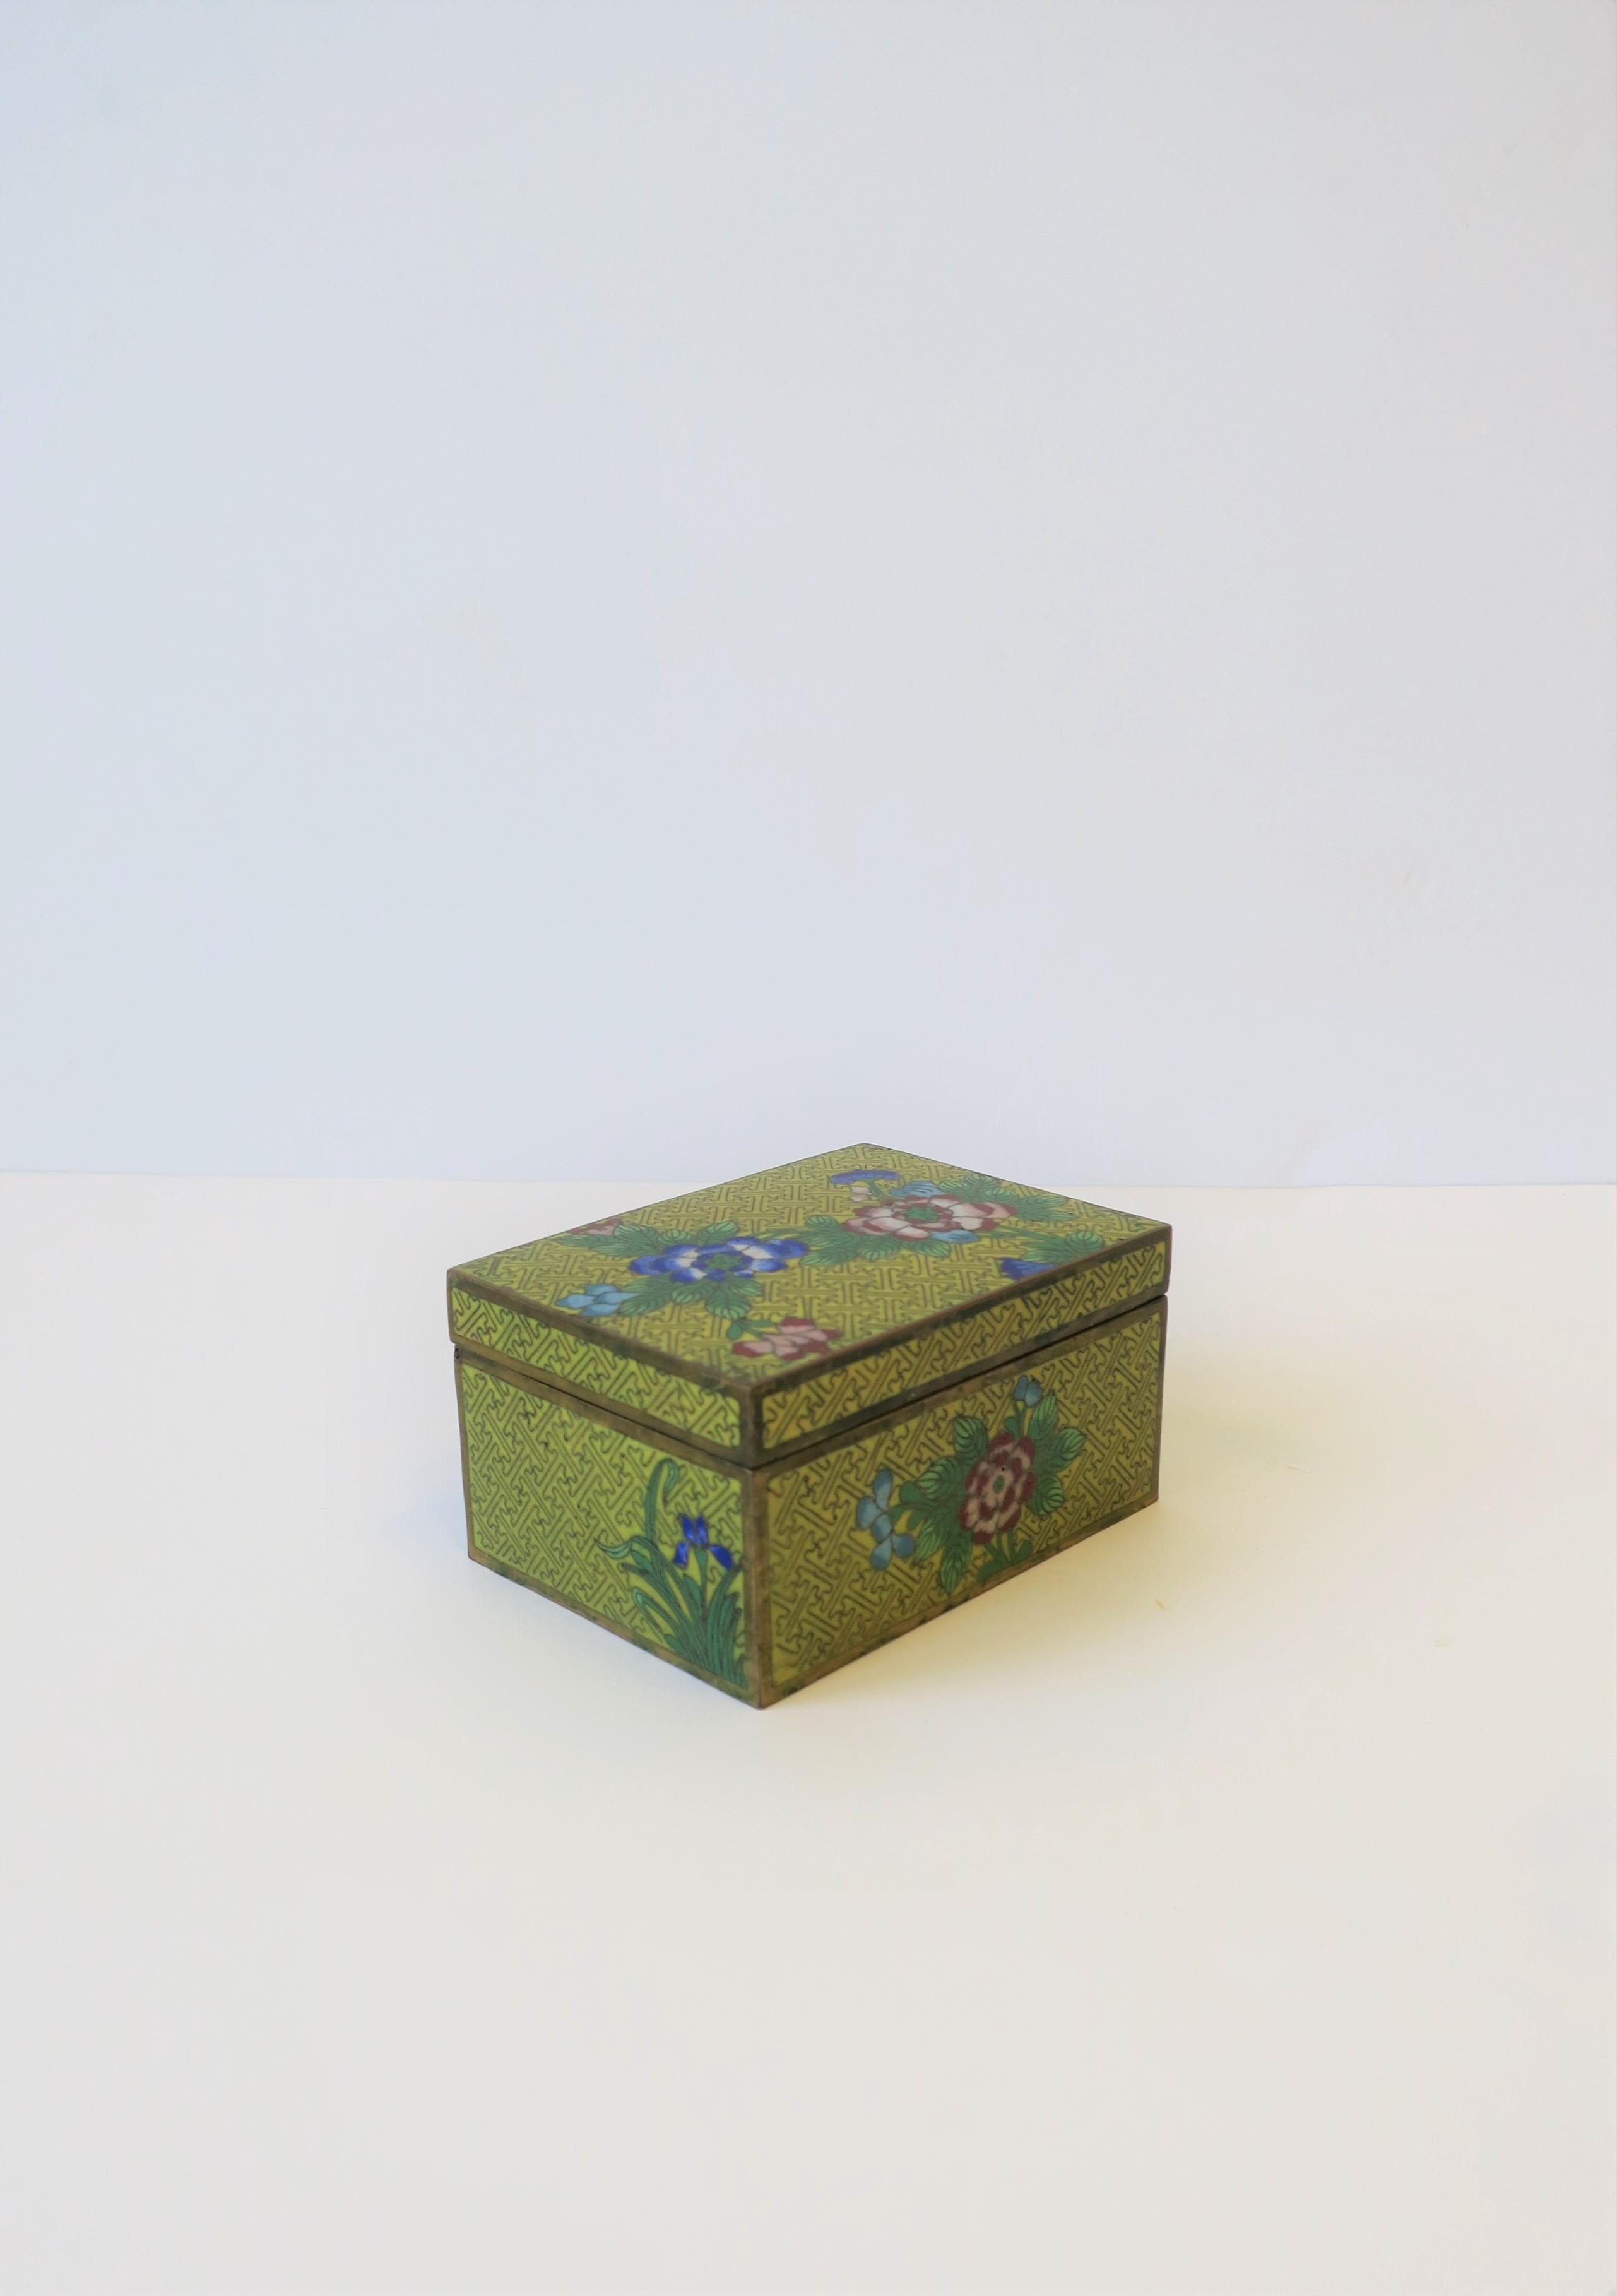 A beautiful Chinese Cloisonné enamel and brass box, circa early 20th century, China. Box is predominantly yellow enamel with detailed blue, white, pink and red flowers, with green leaves and grass. A great box for a vanity or desk area. Box